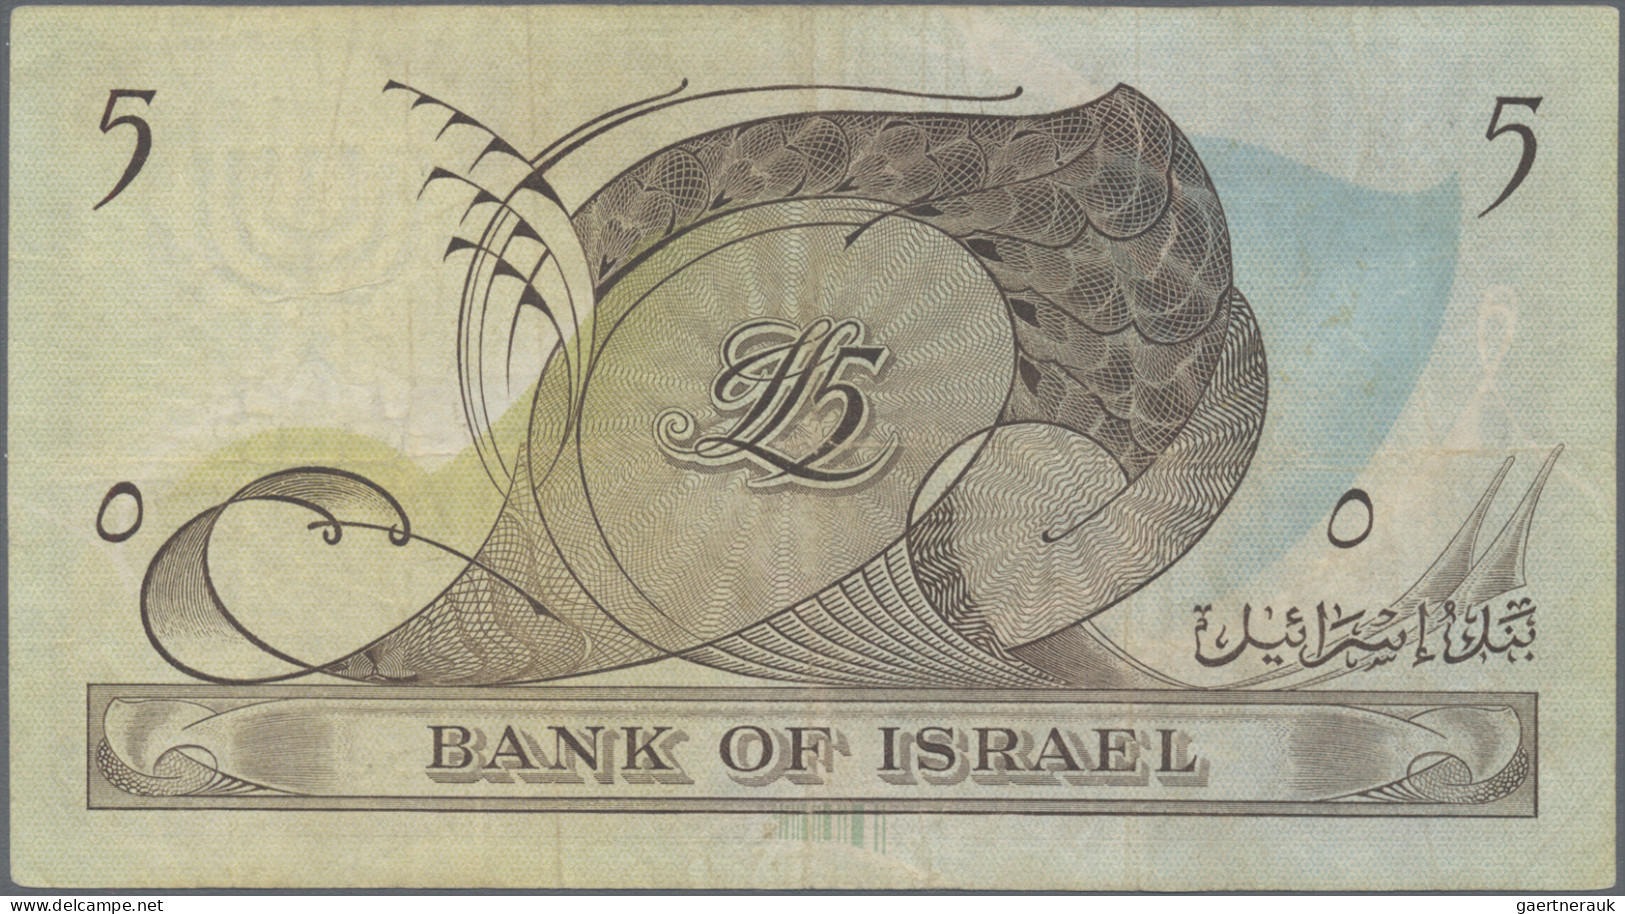 Israel: Bank Of Israel, Set With 4 Banknotes, 1955 Series, With 500 Pruta (P.24a - Israel